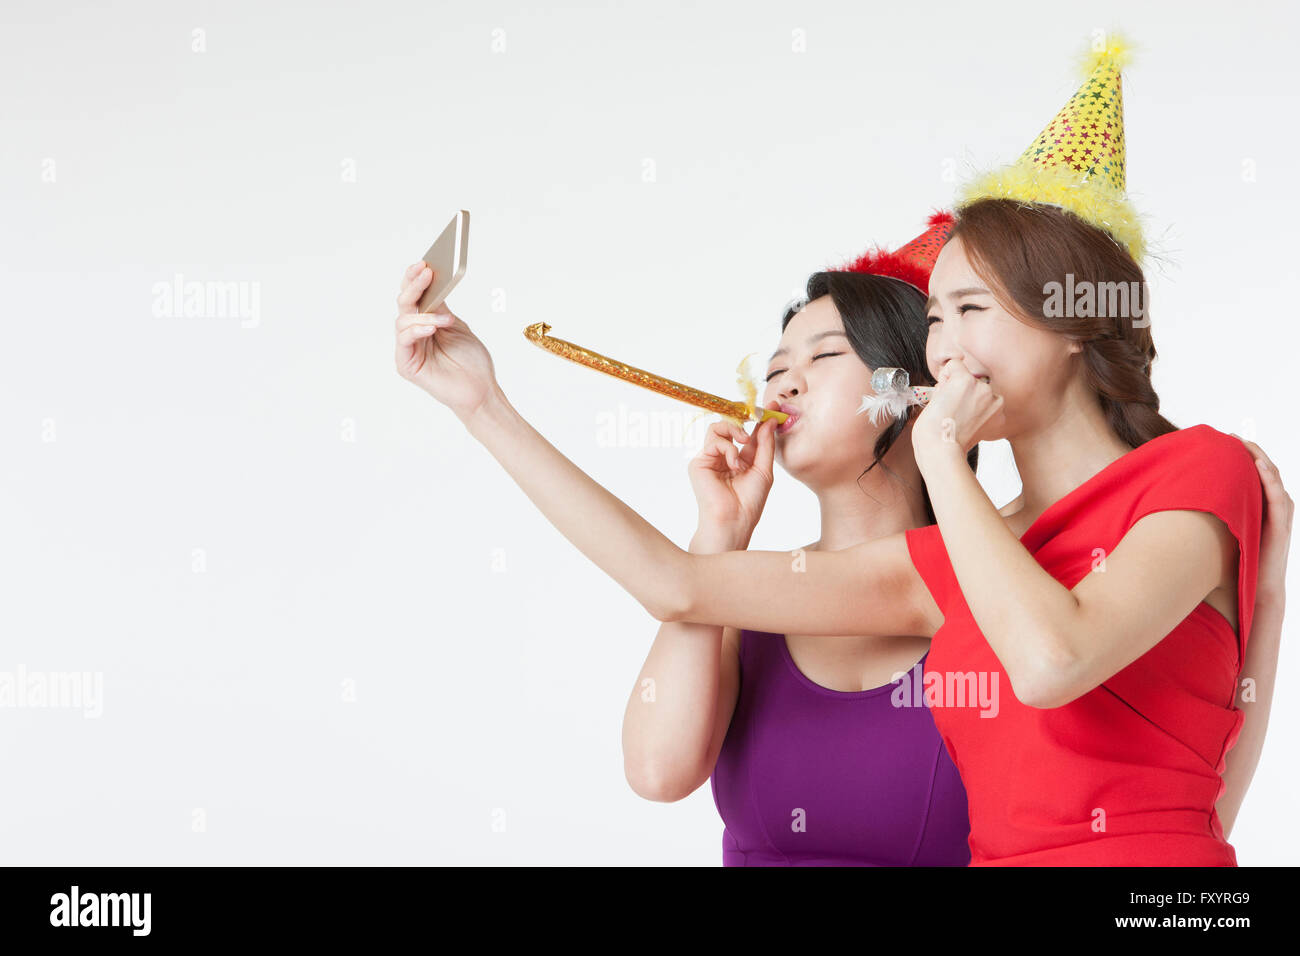 Side view portrait of two young smiling women talking a selfie blowing party horns Stock Photo